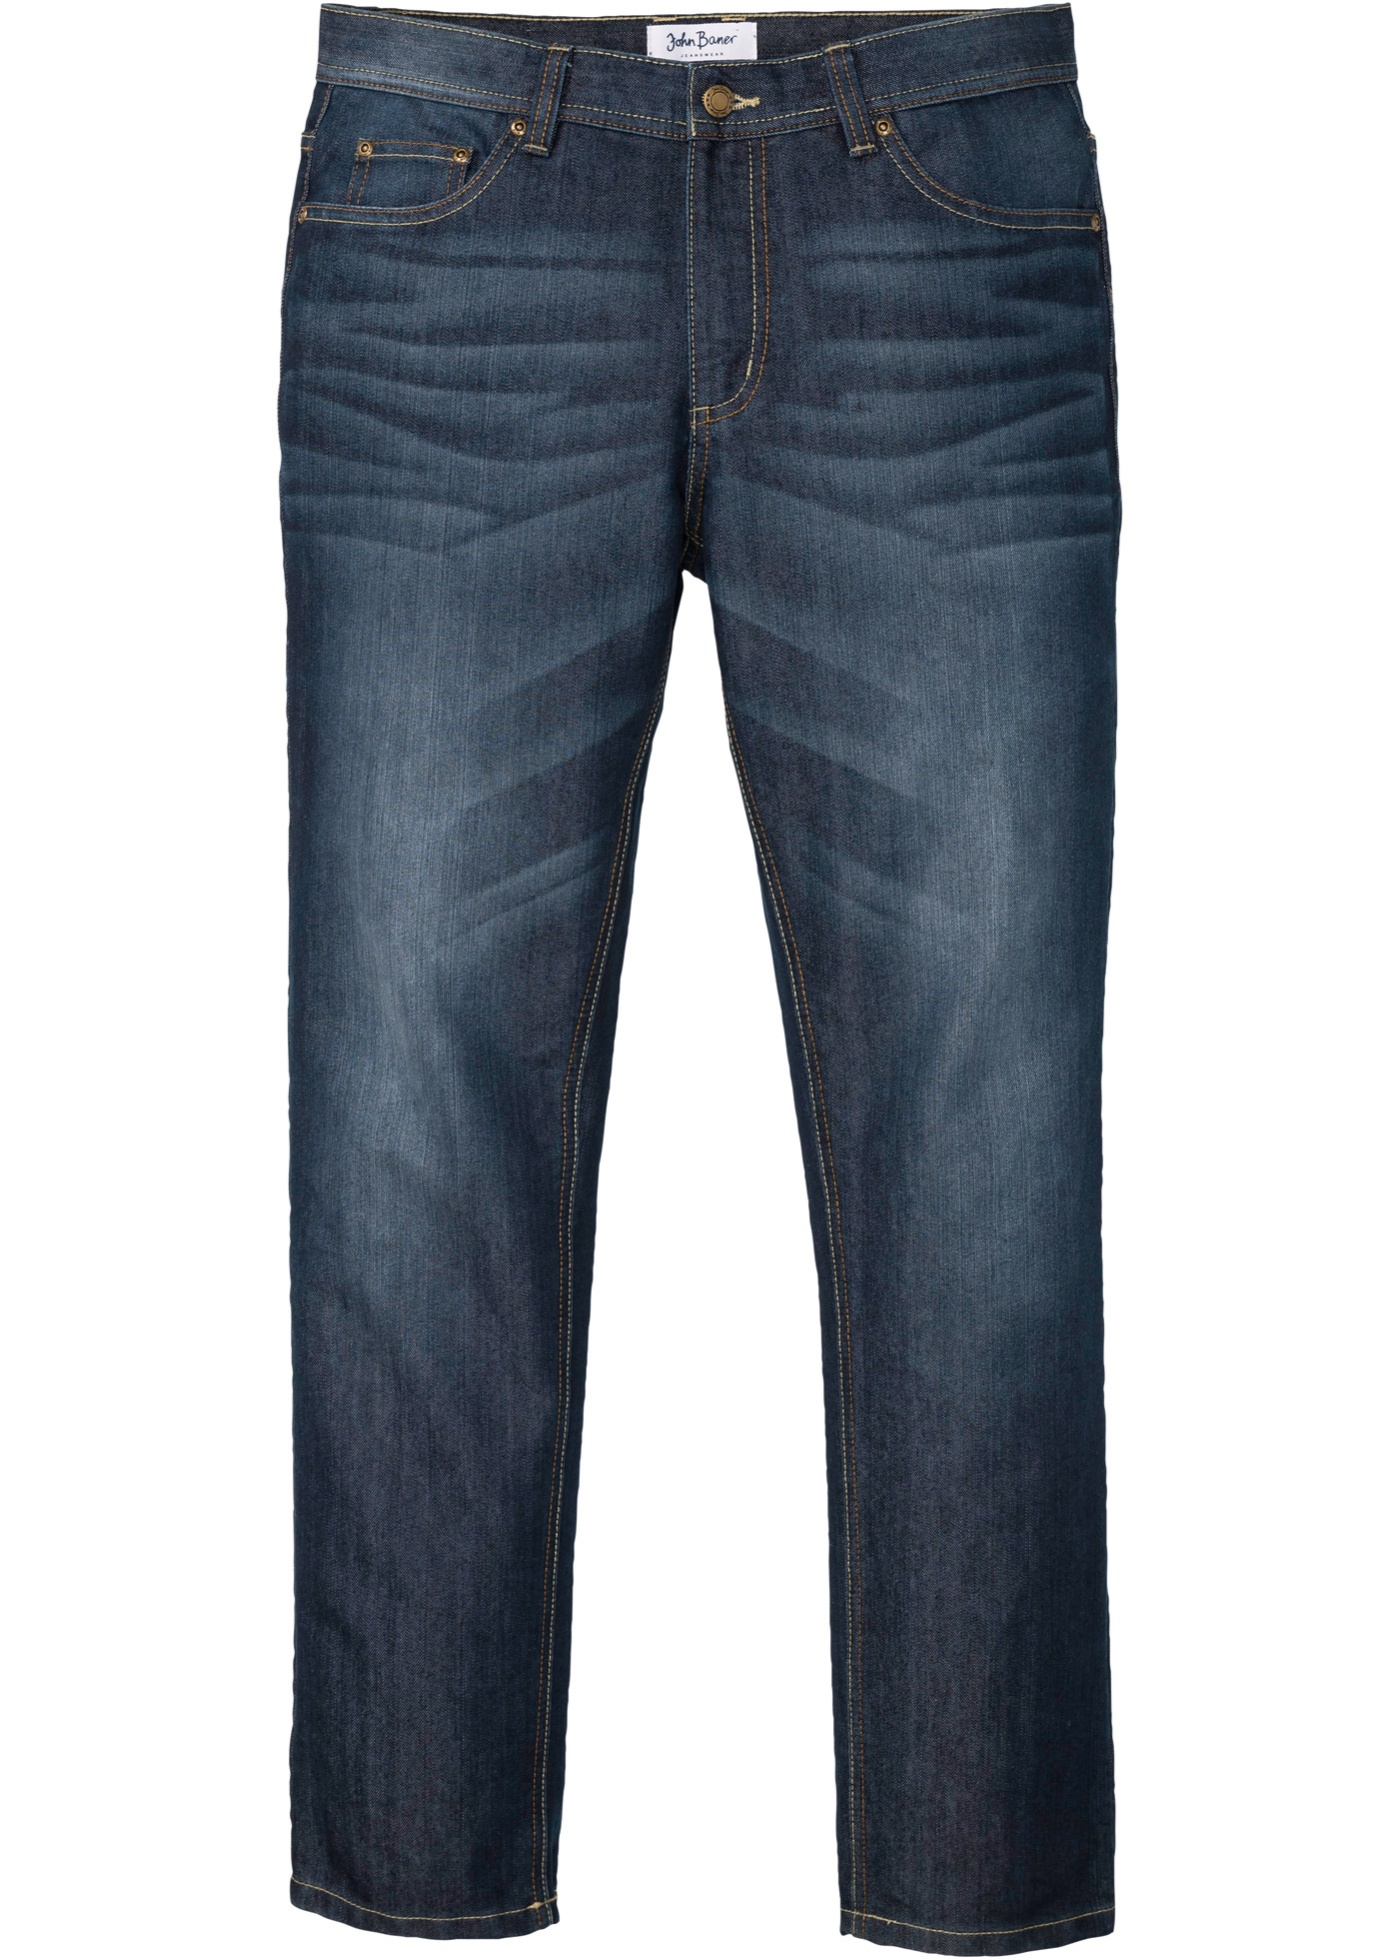 Loose fit jeans, tapered